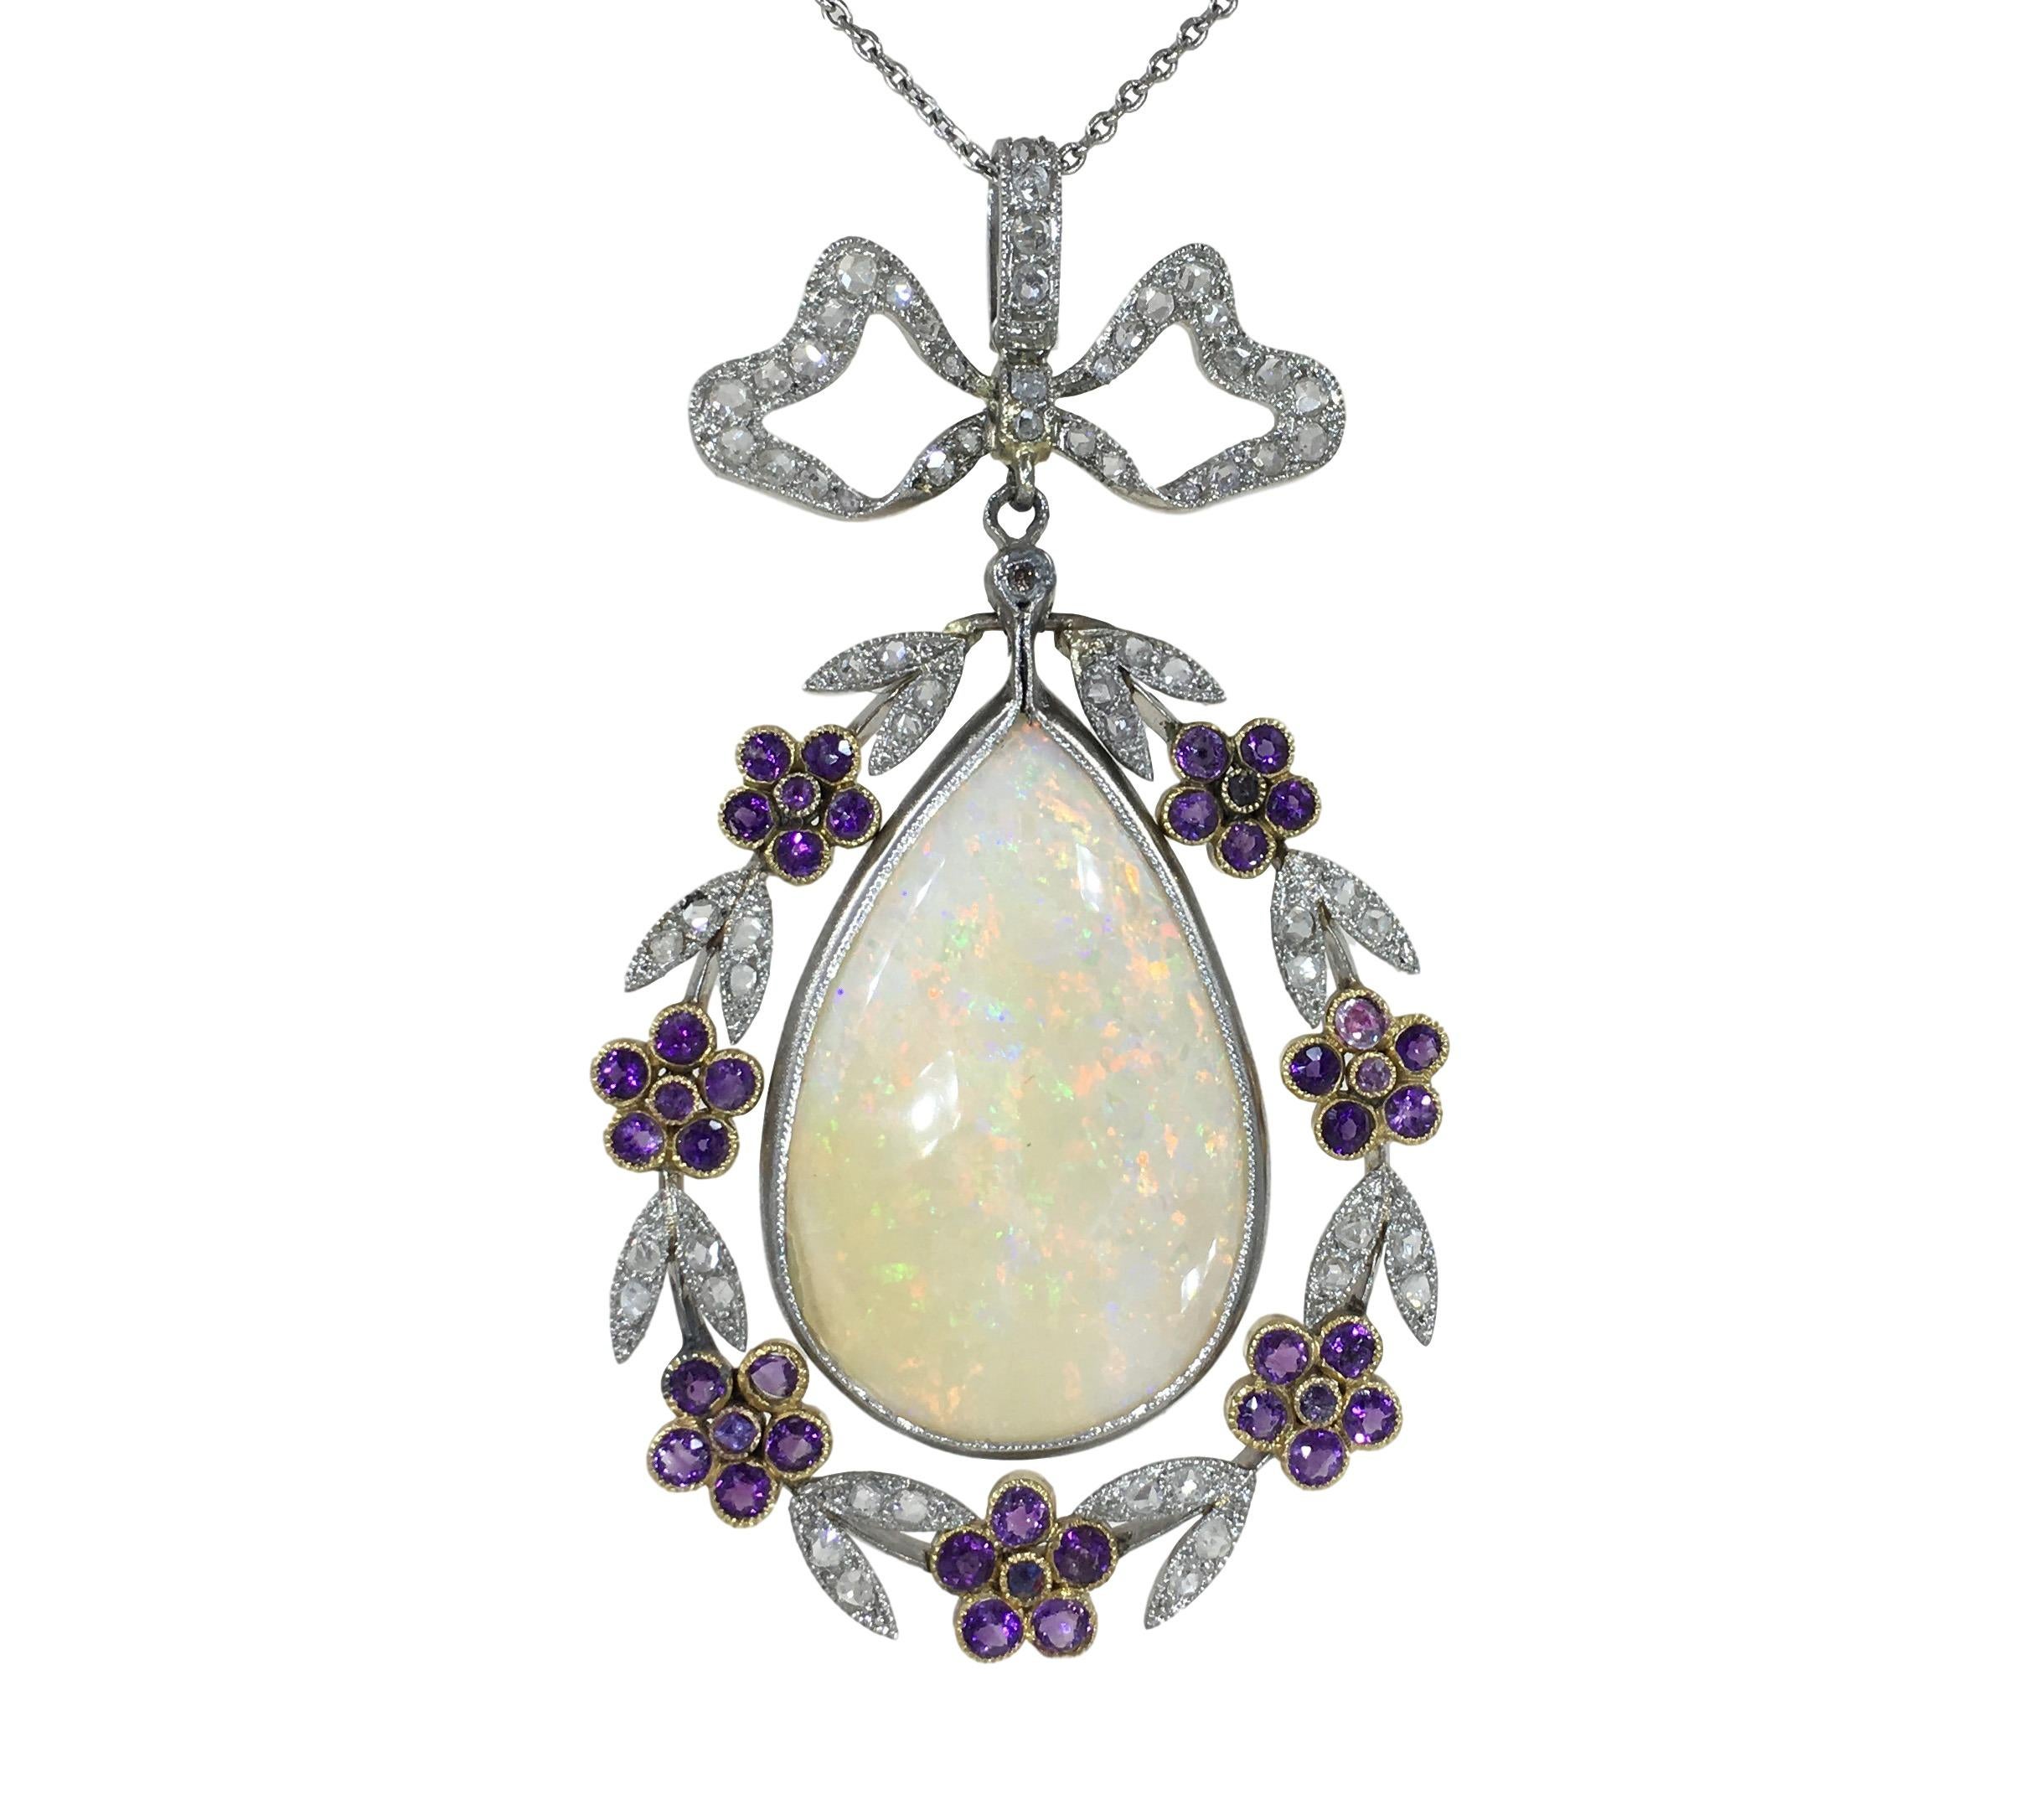 A delightfully pretty pendant centering on a pear-shaped cabochon of white opal with good play of colour ranging from vivid reds and oranges through to hints of green and violet. The opal is set in a platinum mount and suspended within a garland